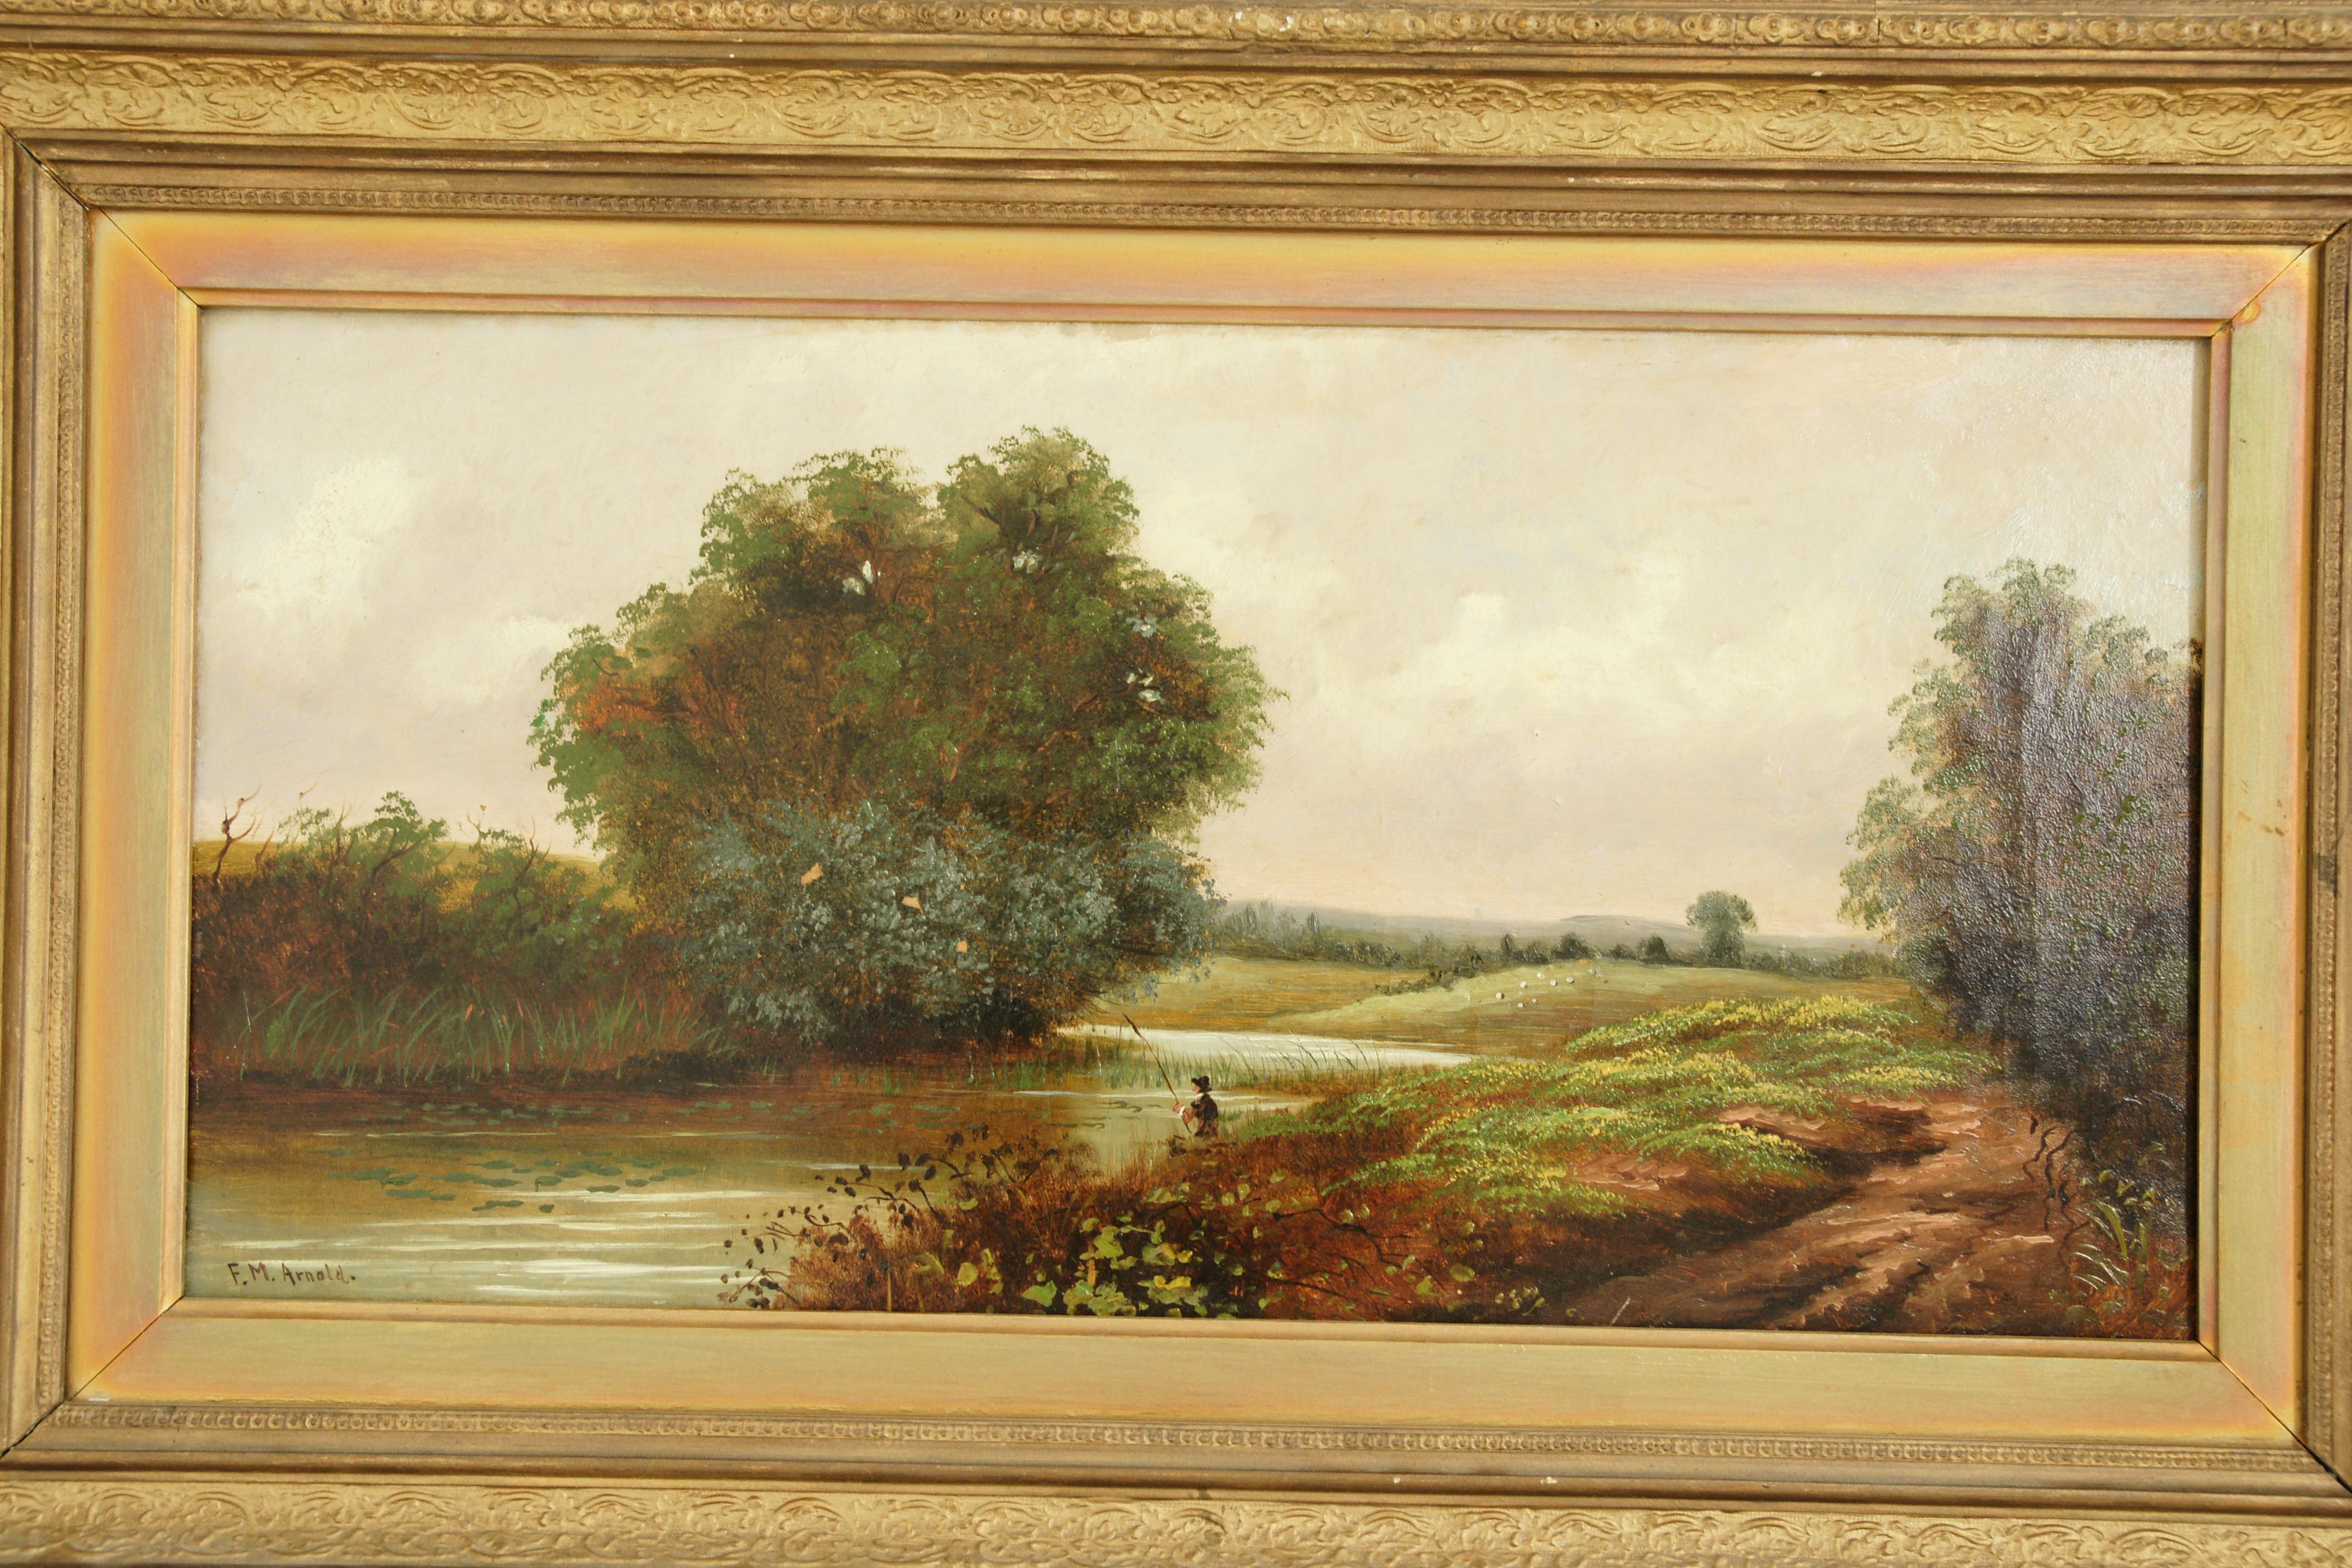 Hand-Painted Pair of Antique Paintings, Antique Oil Paintings, Scenics, Scotland 1870, B1529